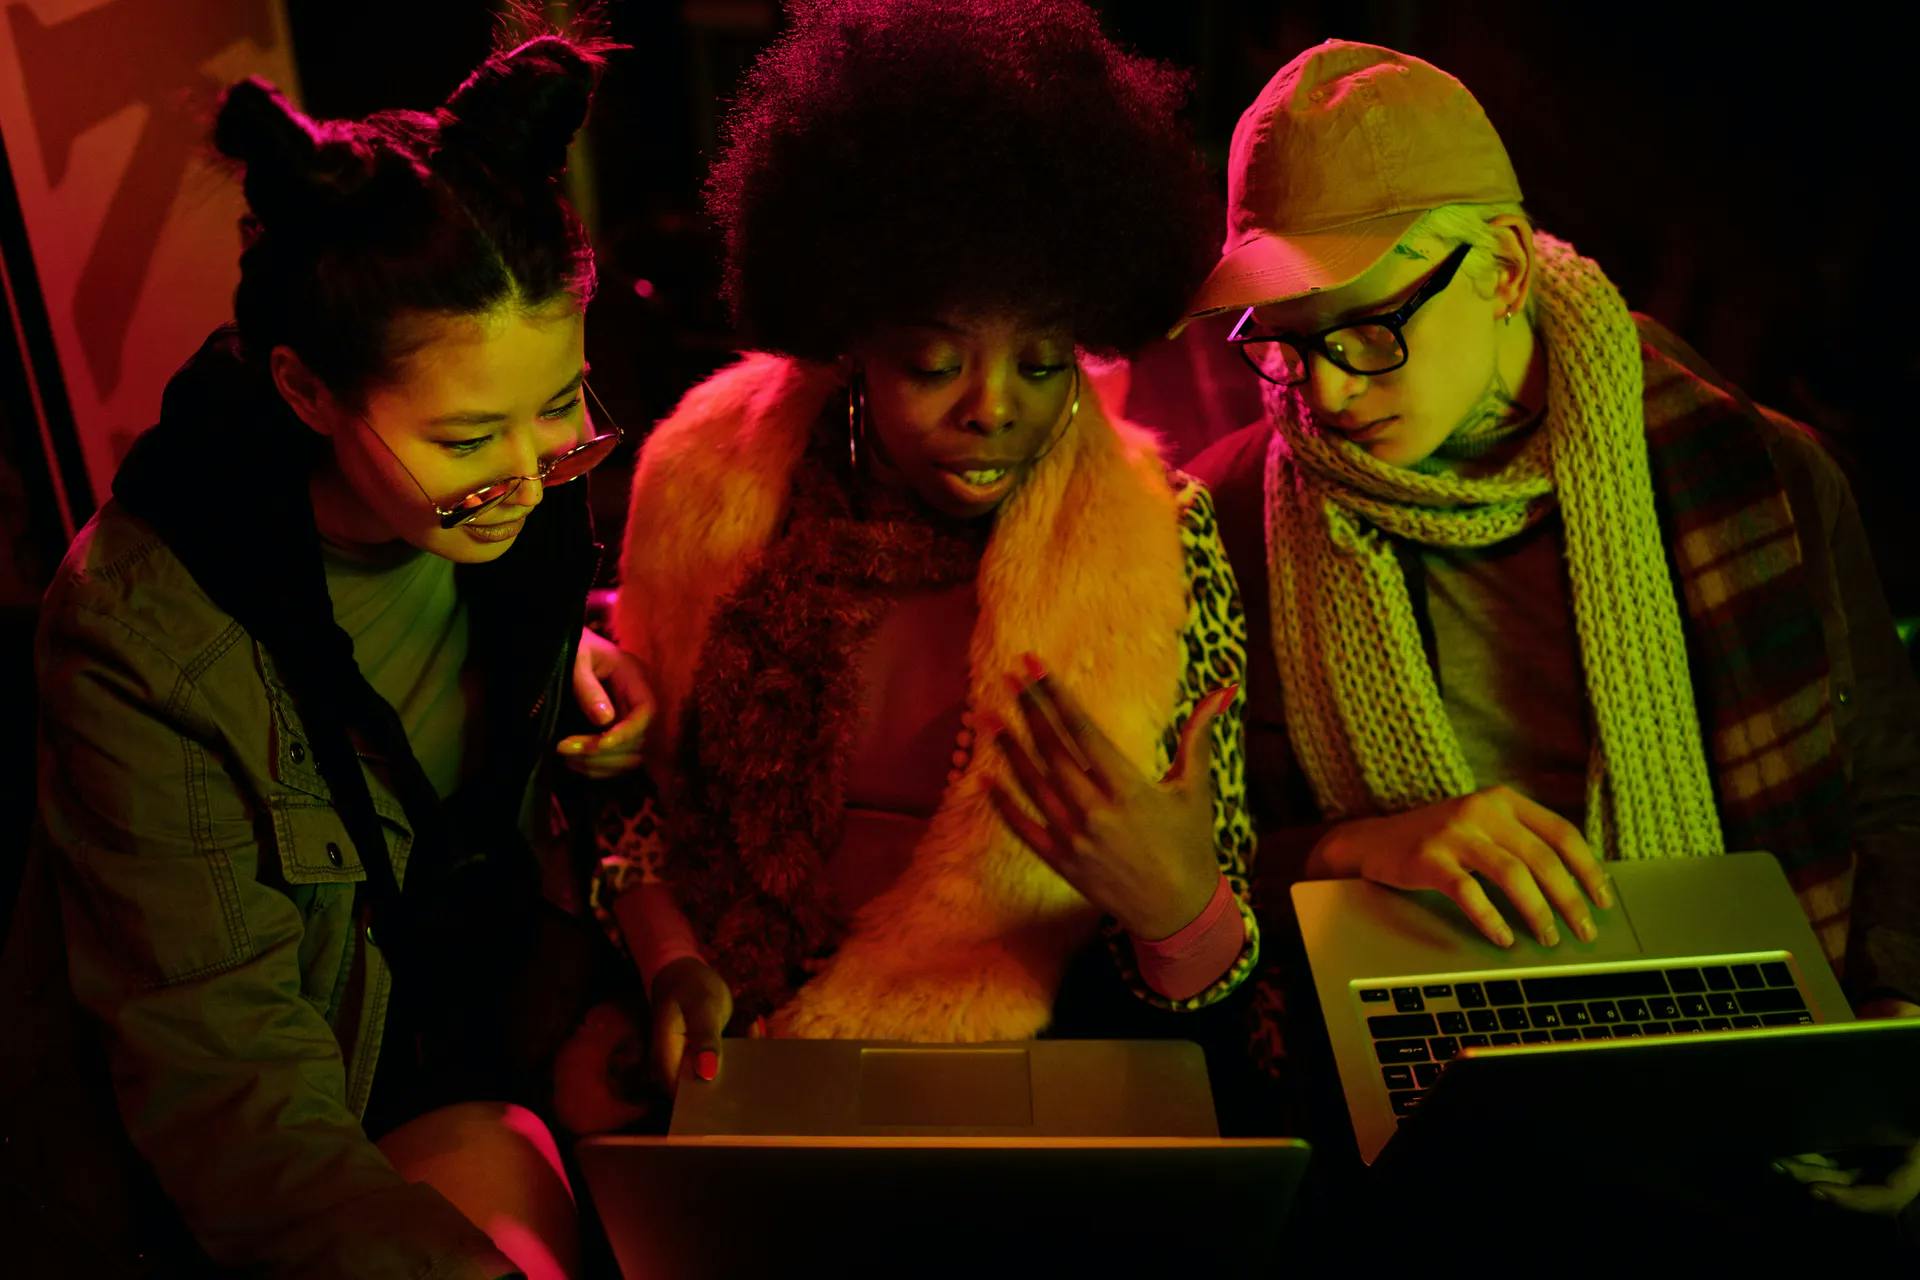 Three women in front of their laptops deep in discussion